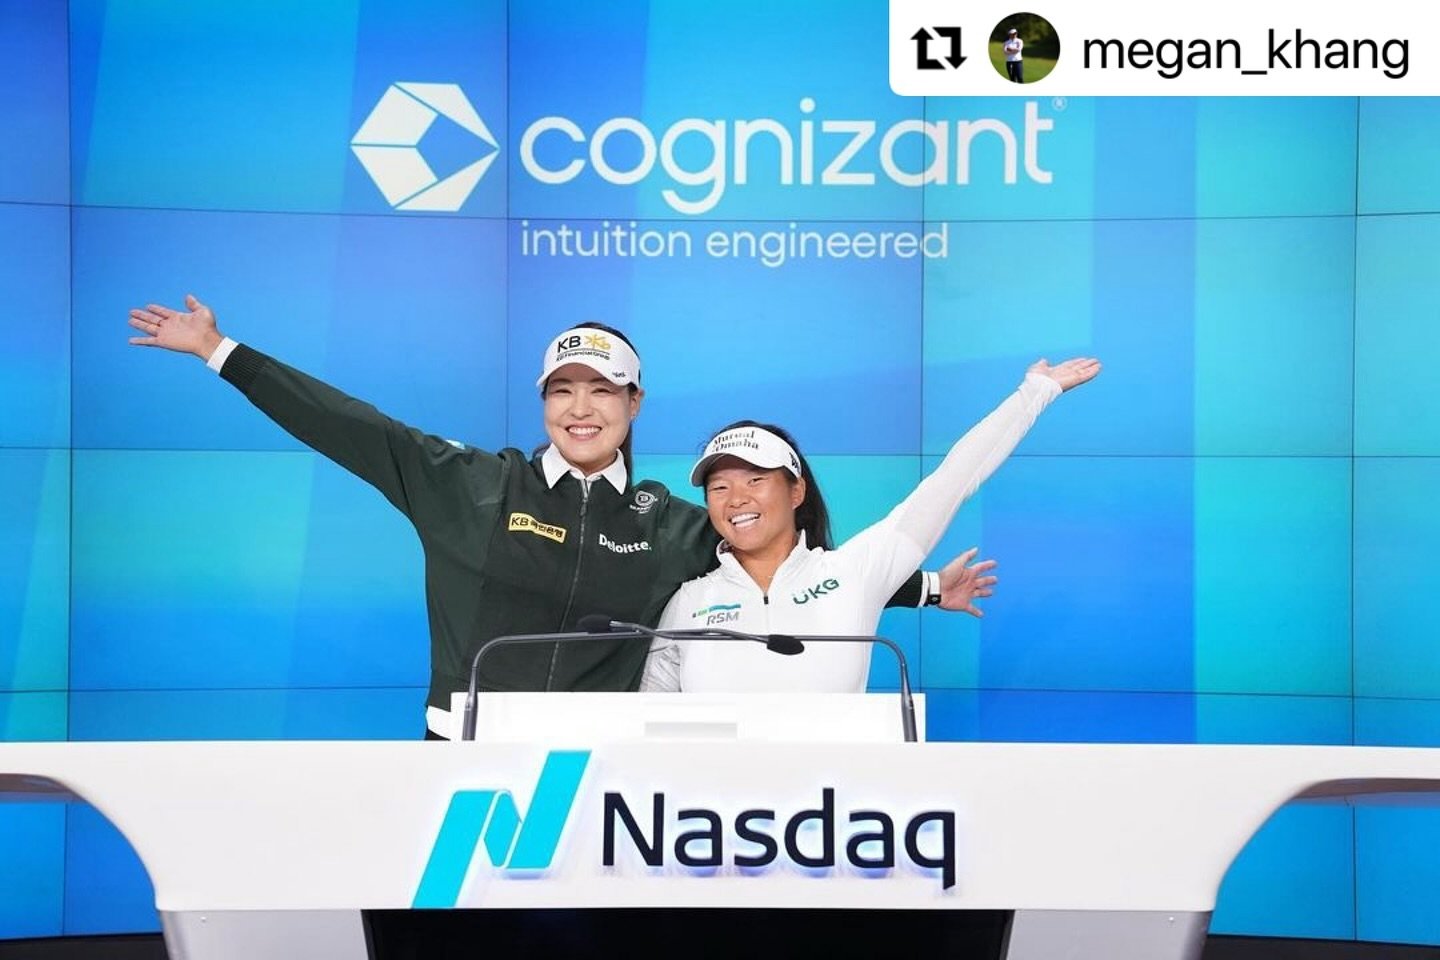 Megan Khang ringing the Nasdaq Stock Market Bell in Times Square this morning to promote the Cognizant Founders Cup!
・・・
#Repost @megan_khang